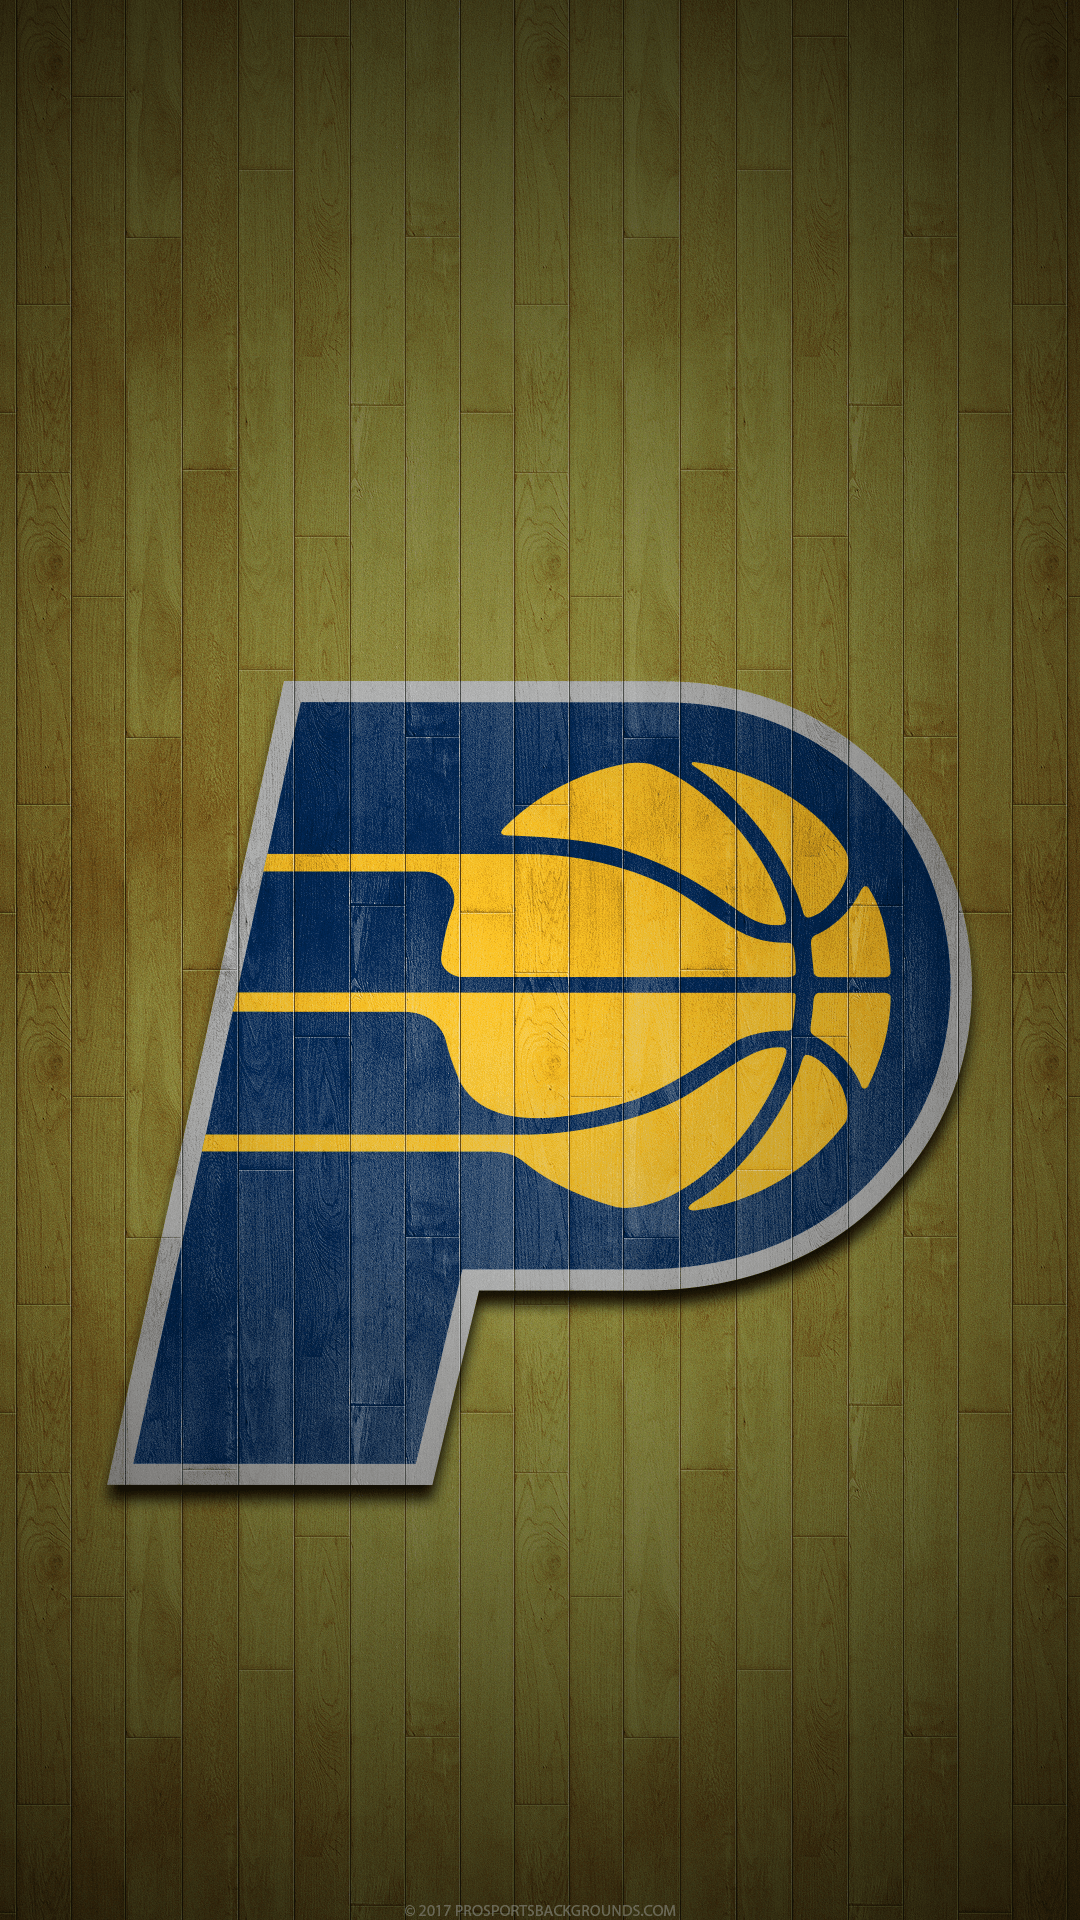 Download wallpapers Indiana Pacers American Basketball Club NBA Blue  Stone Background Basketball USA Victor Oladipo Domantas Sabonis Myles  Turner for desktop free Pictures for desktop free